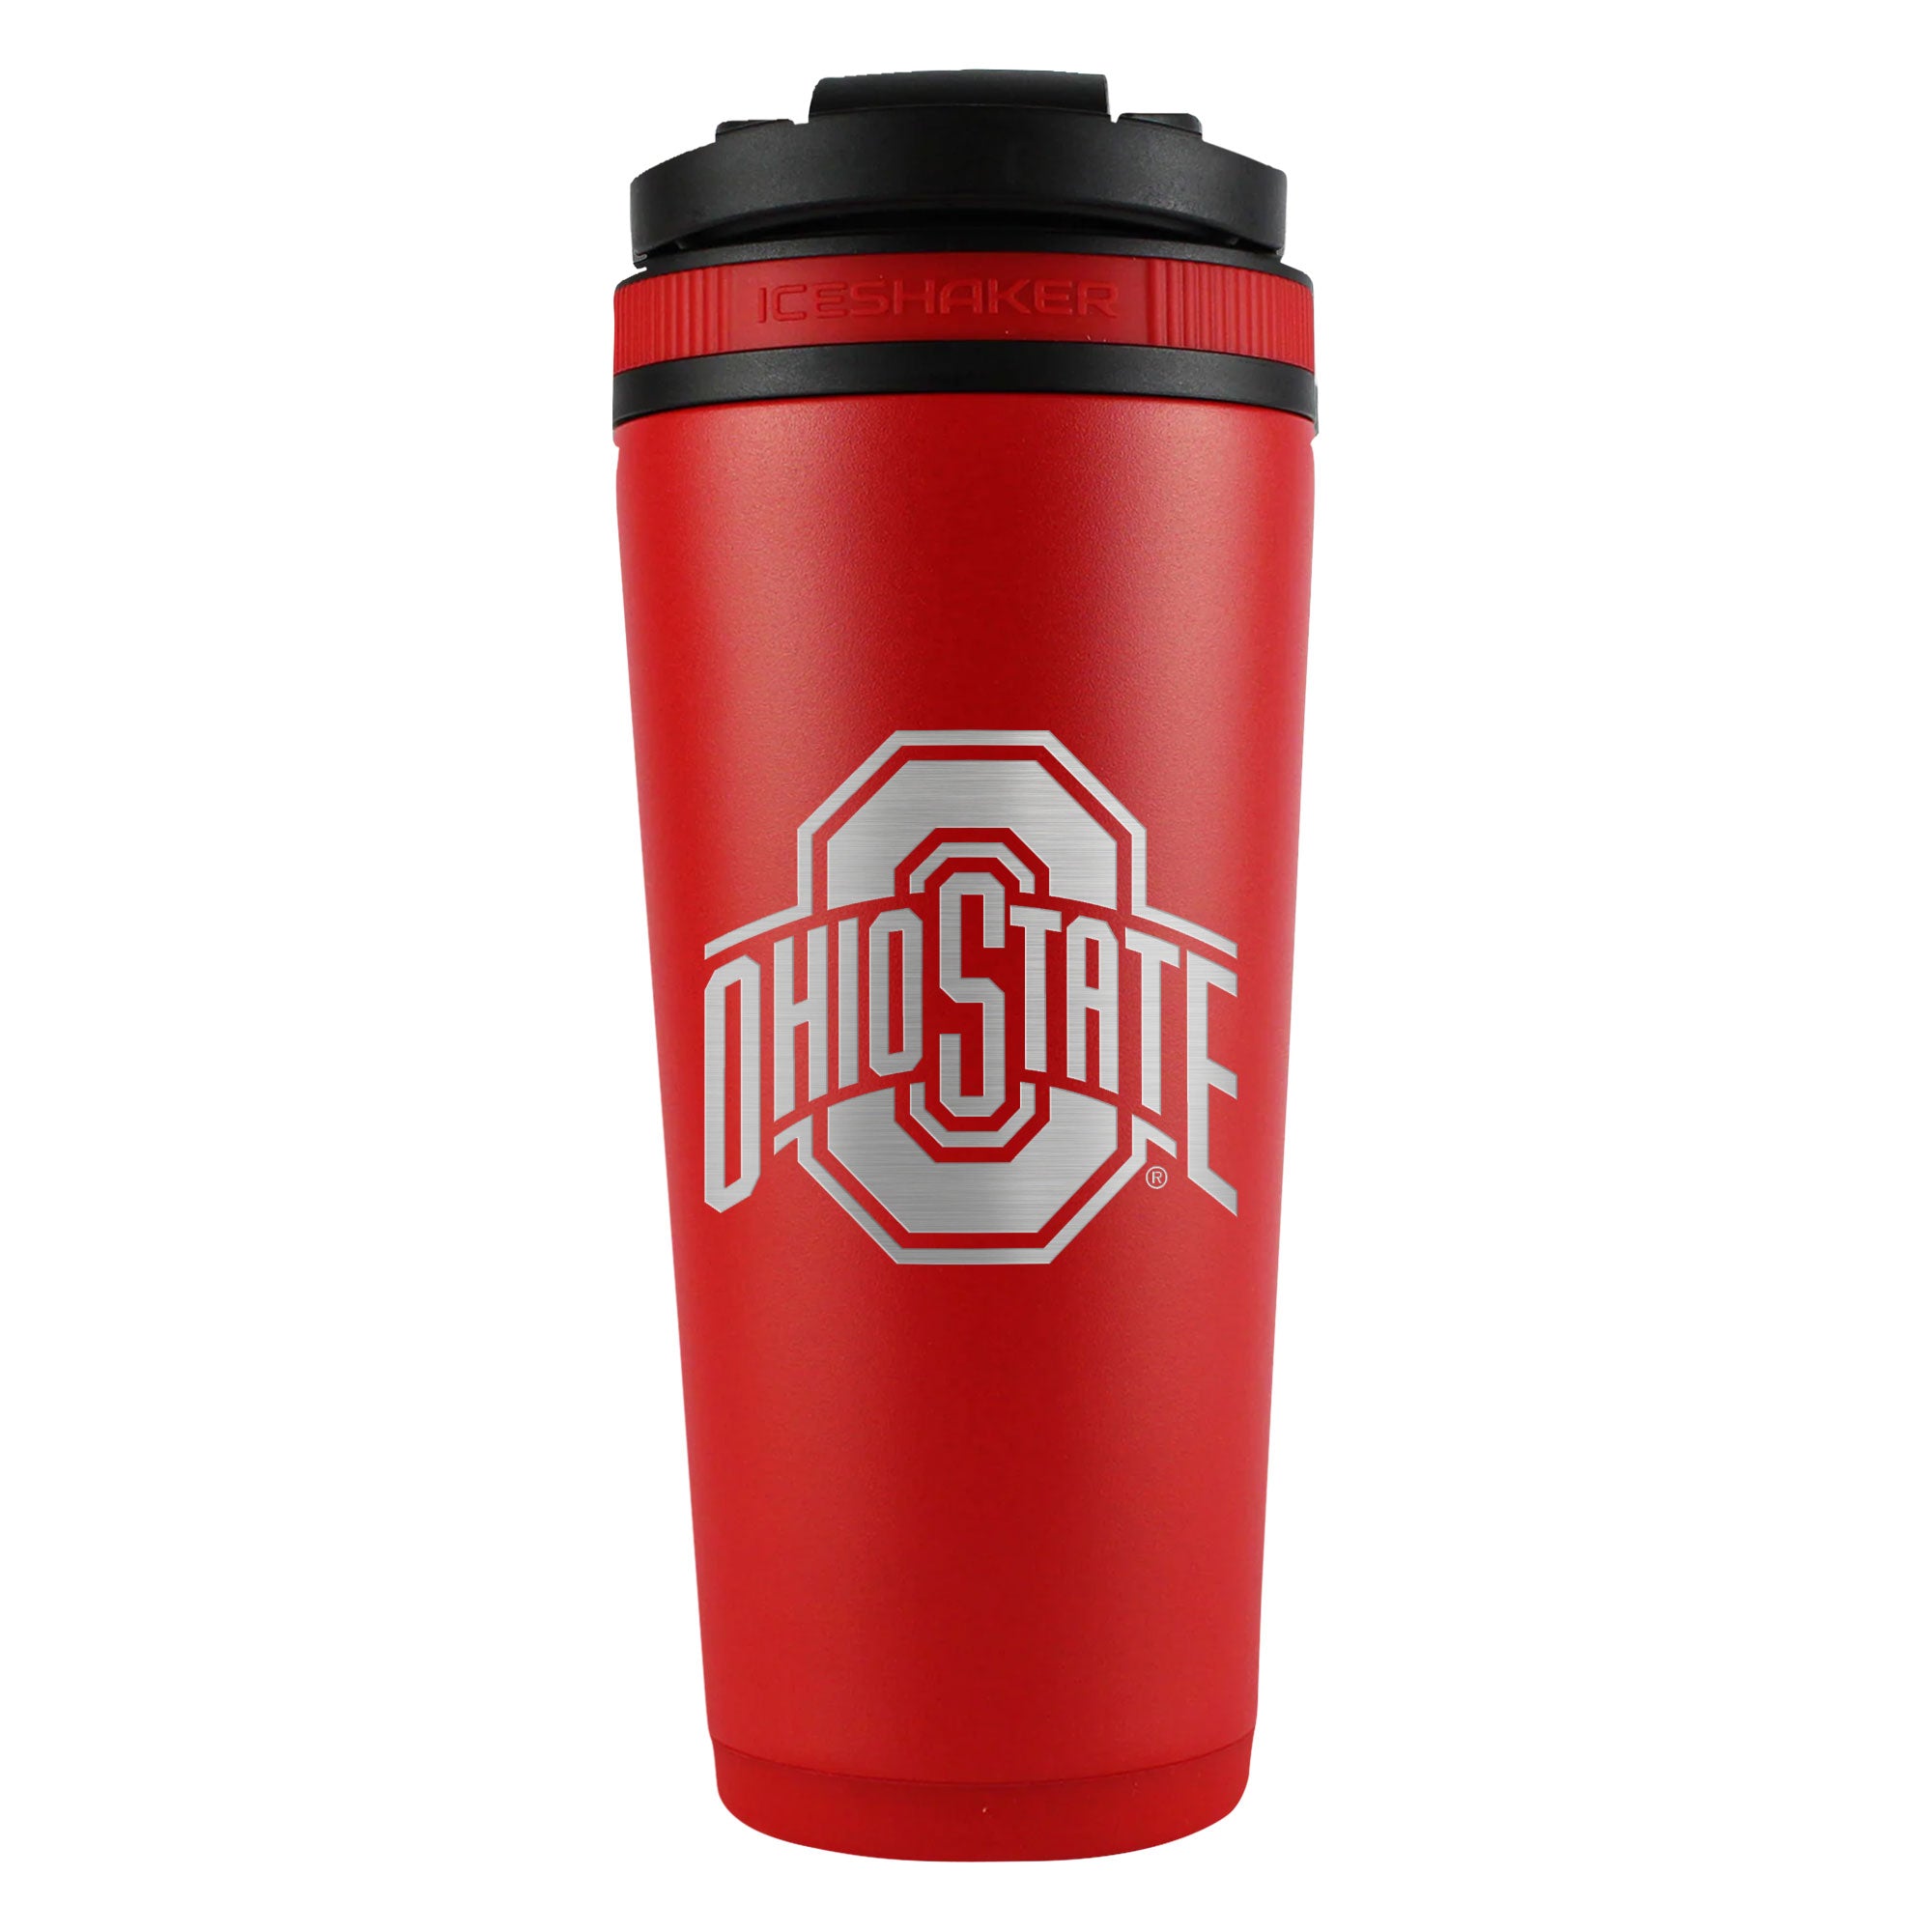 Officially Licensed Ohio State 26oz Ice Shaker - Red